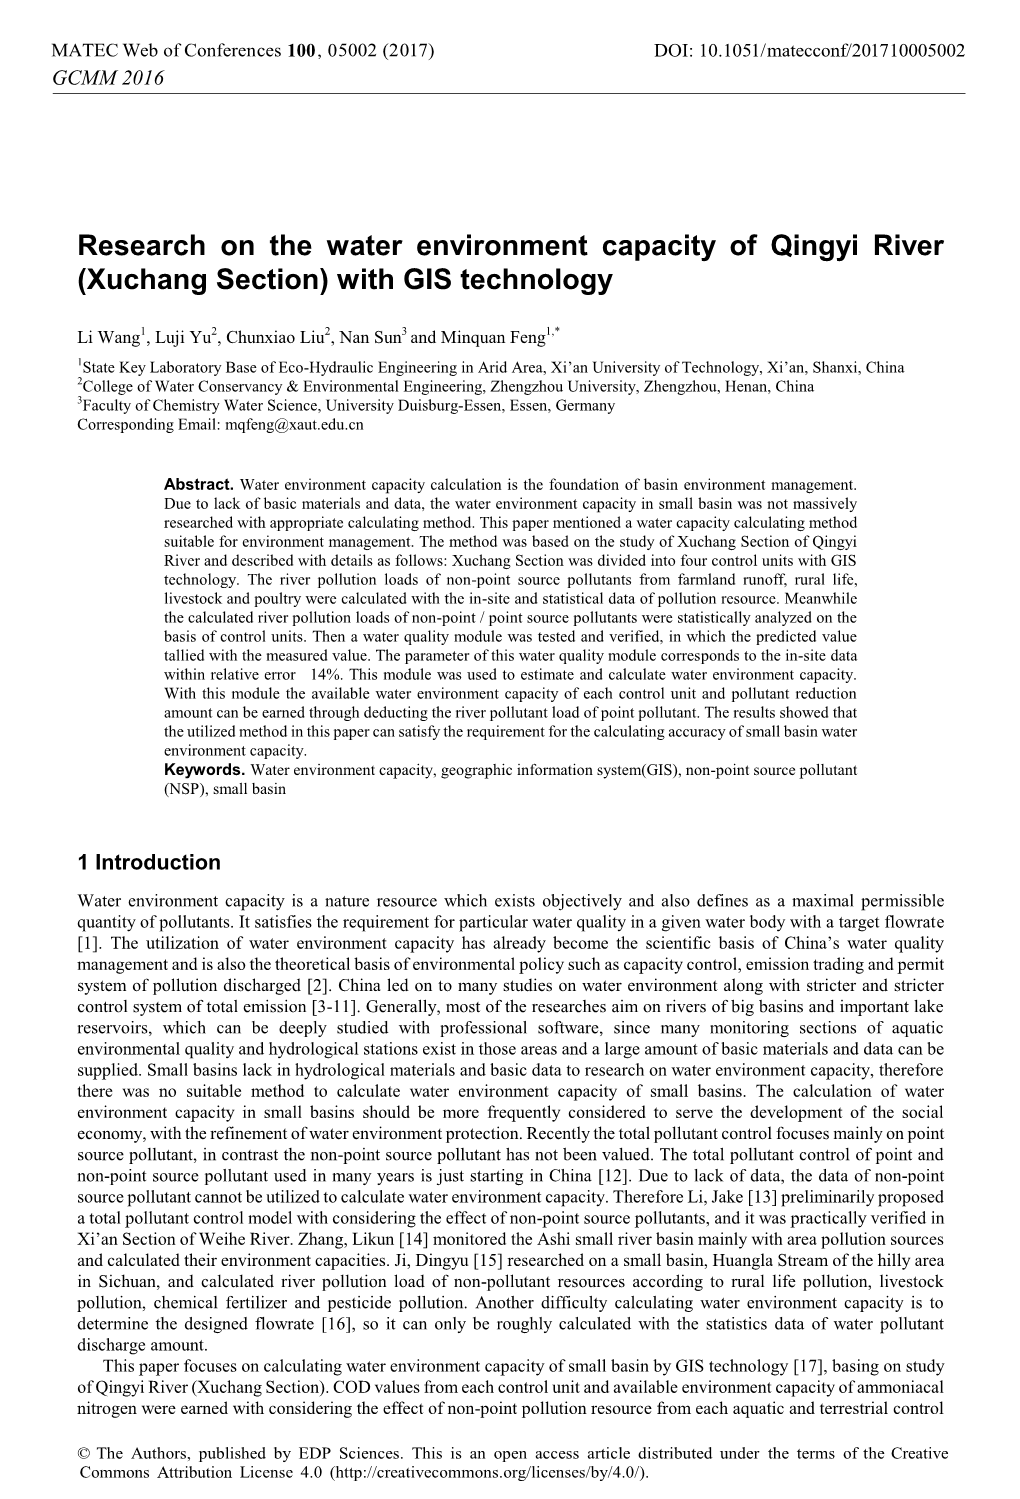 Research on the Water Environment Capacity of Qingyi River (Xuchang Section) with GIS Technology